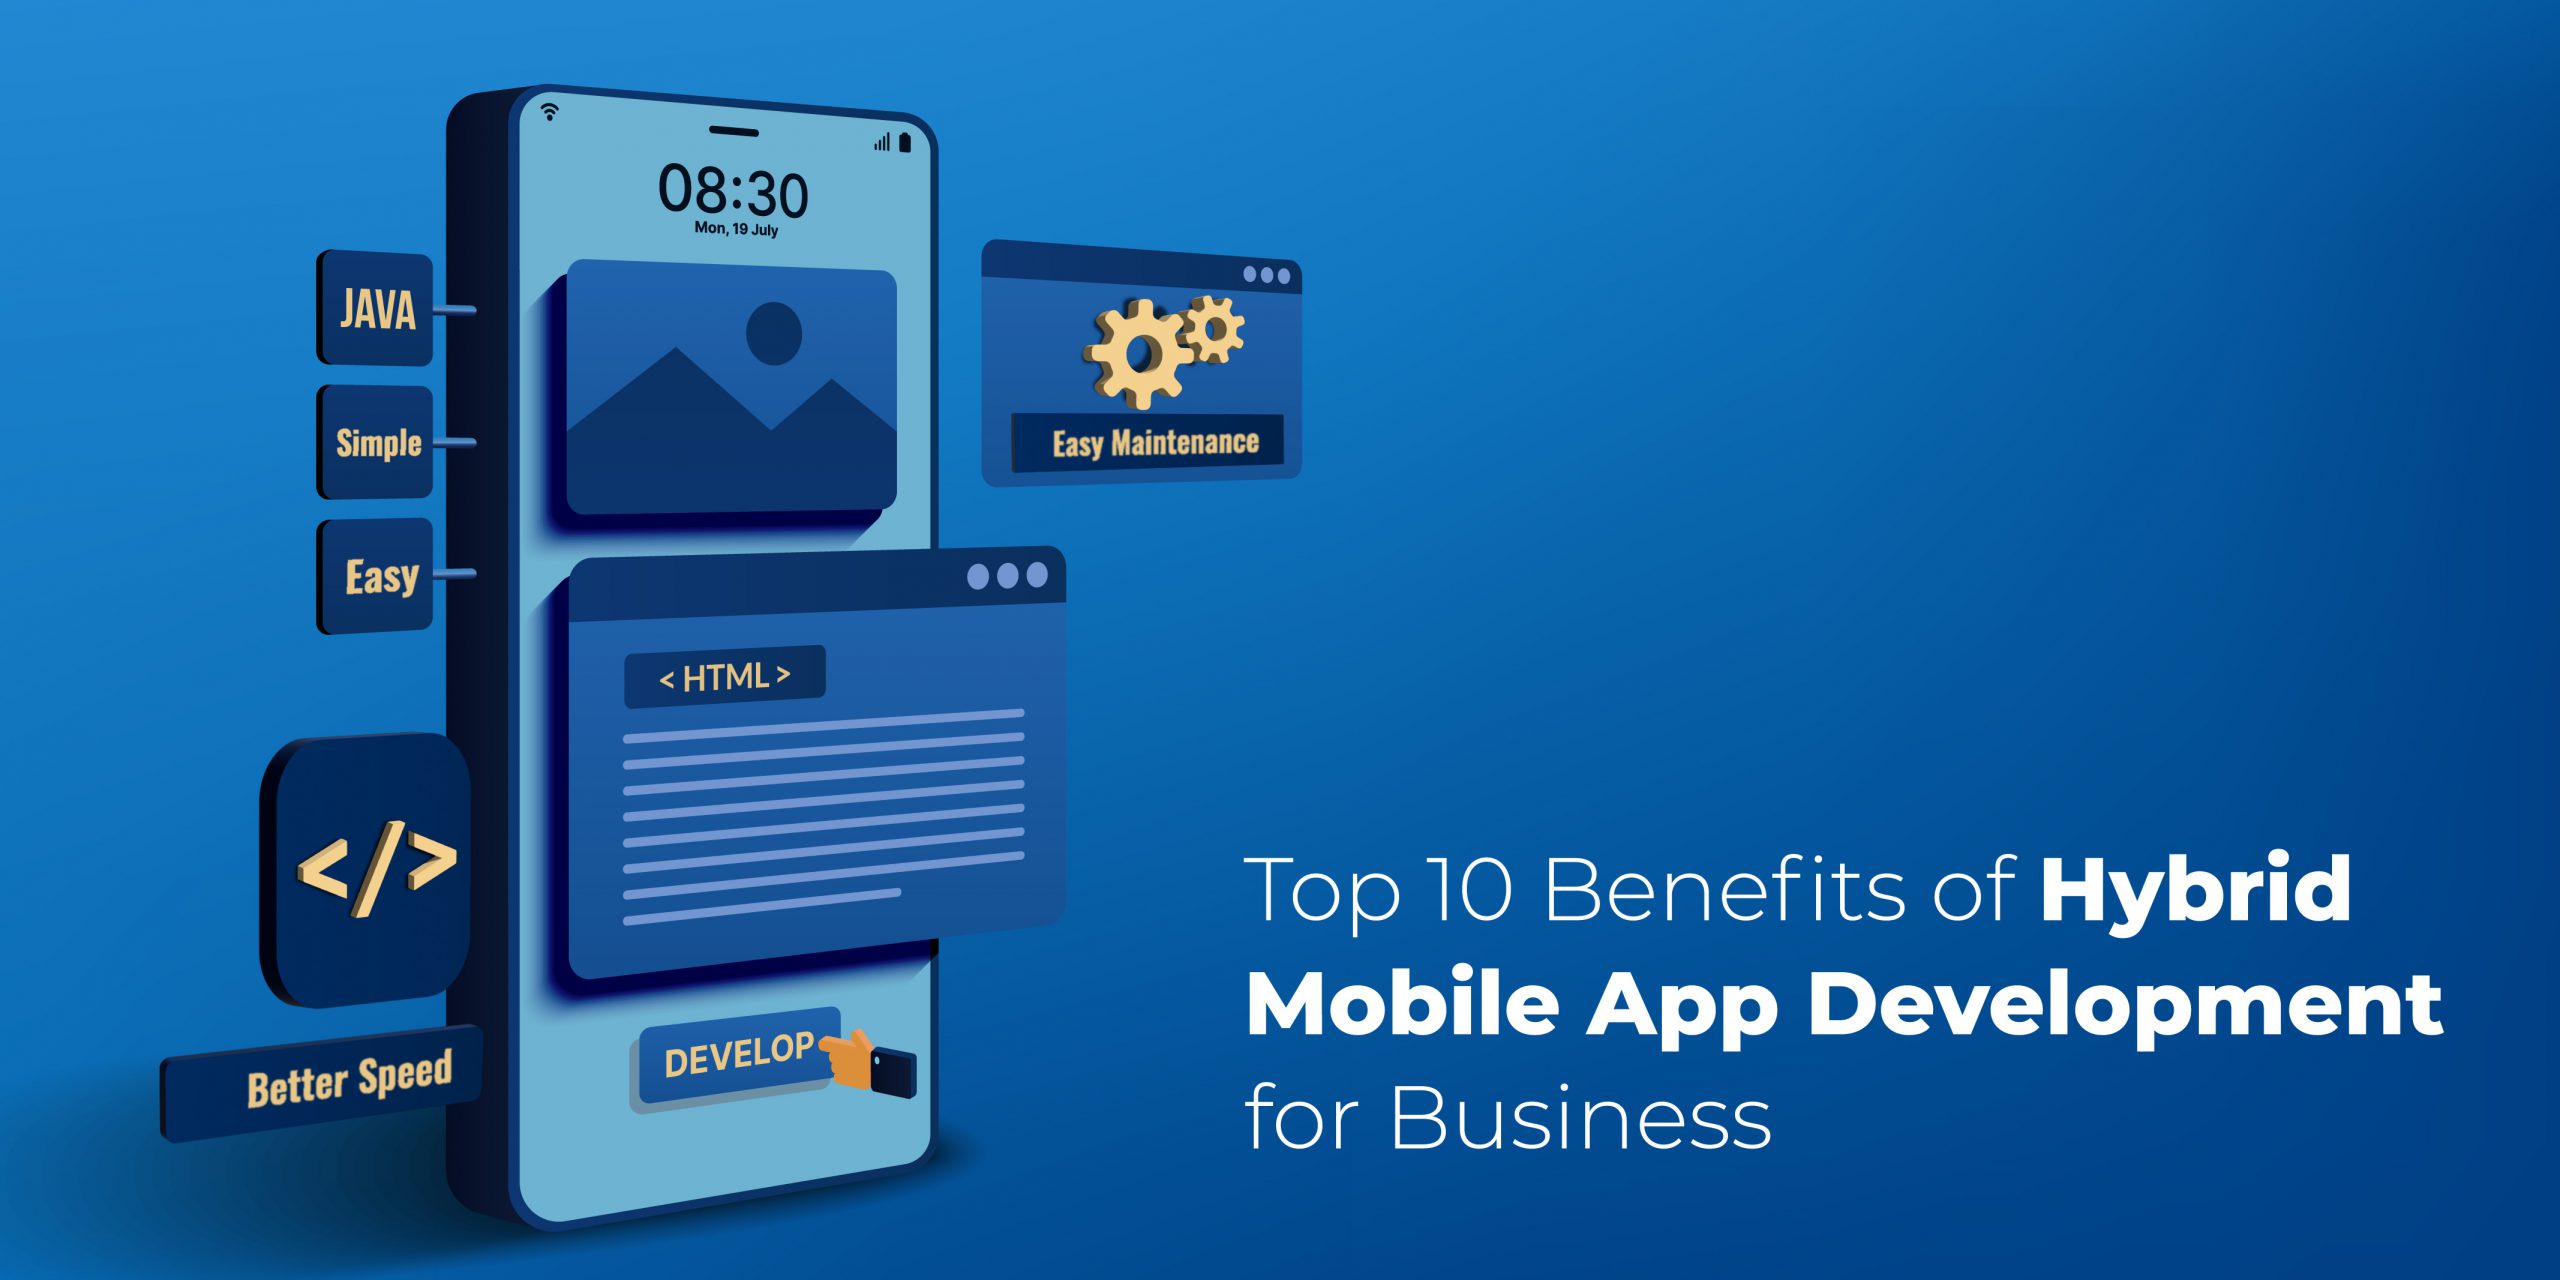 Top 10 Benefits of Hybrid Mobile App Development for Business